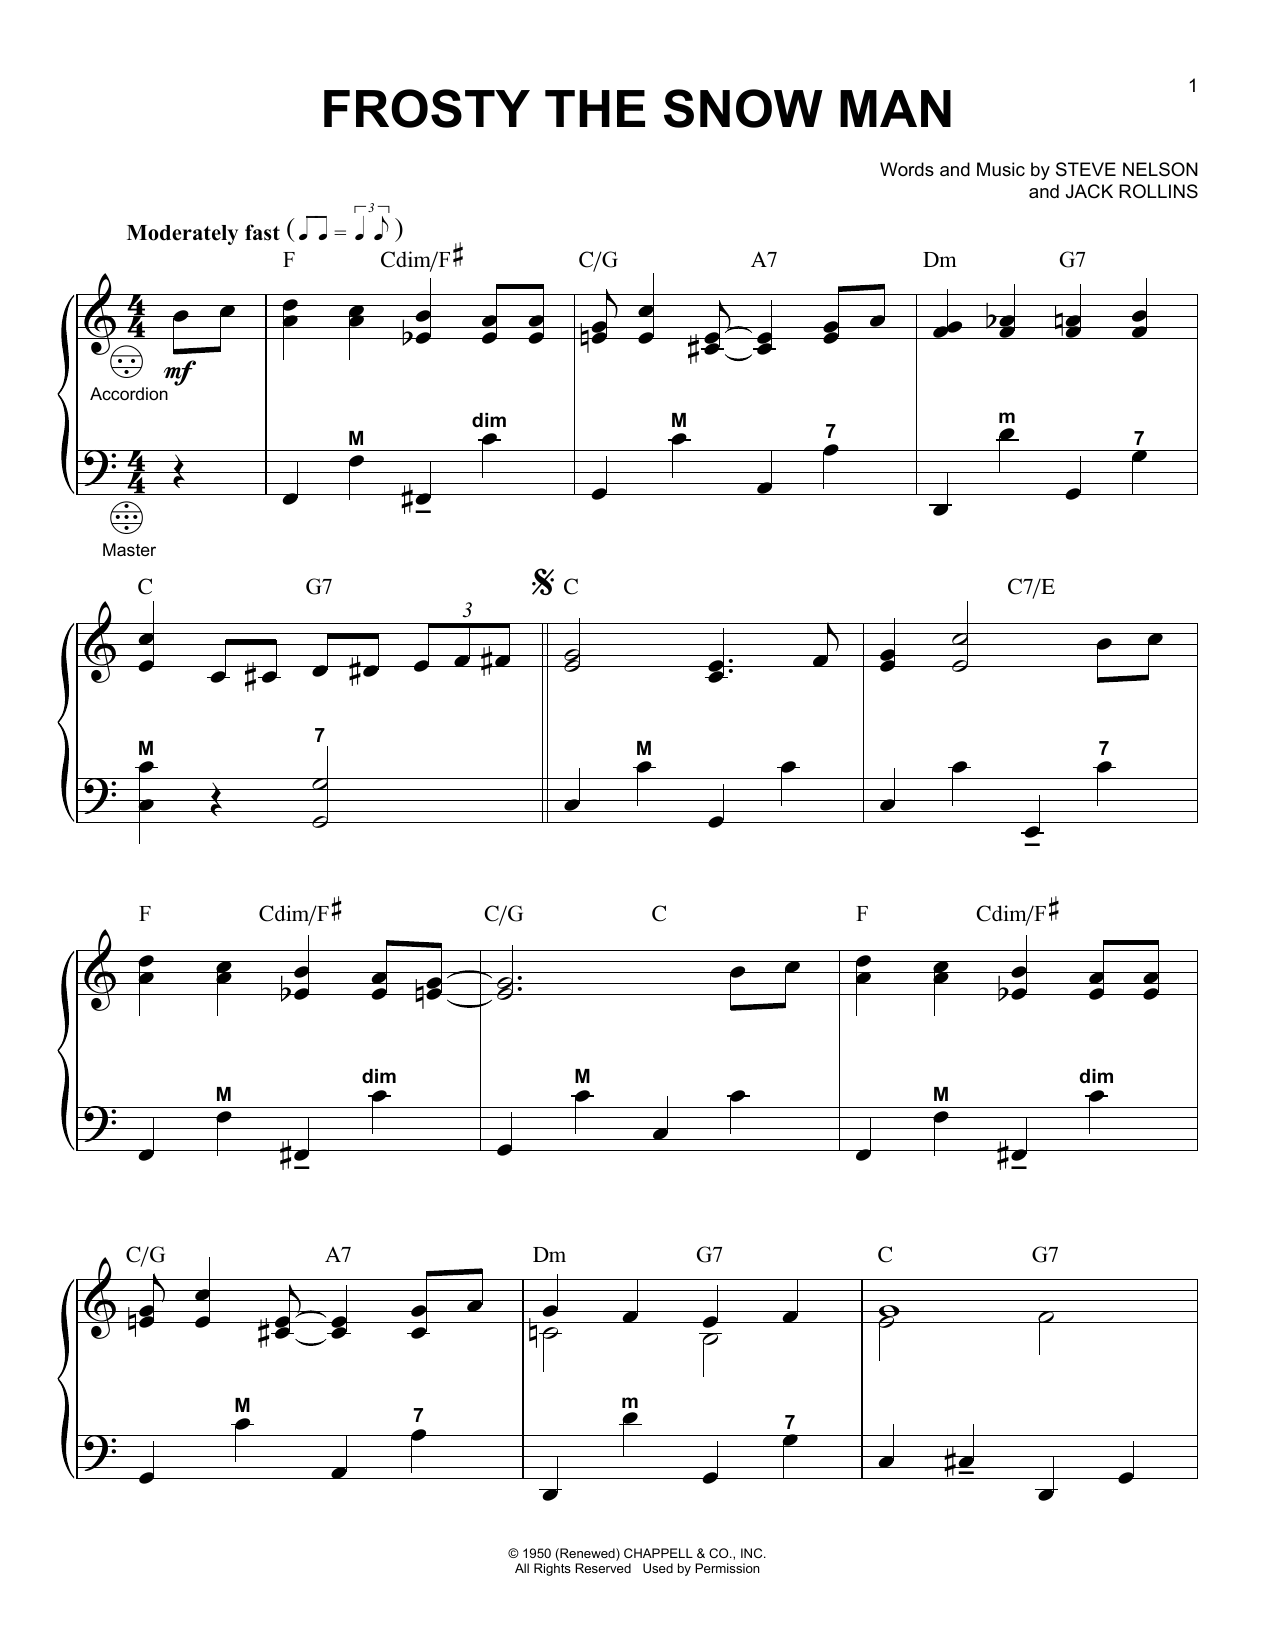 Download Gene Autry Frosty The Snow Man Sheet Music